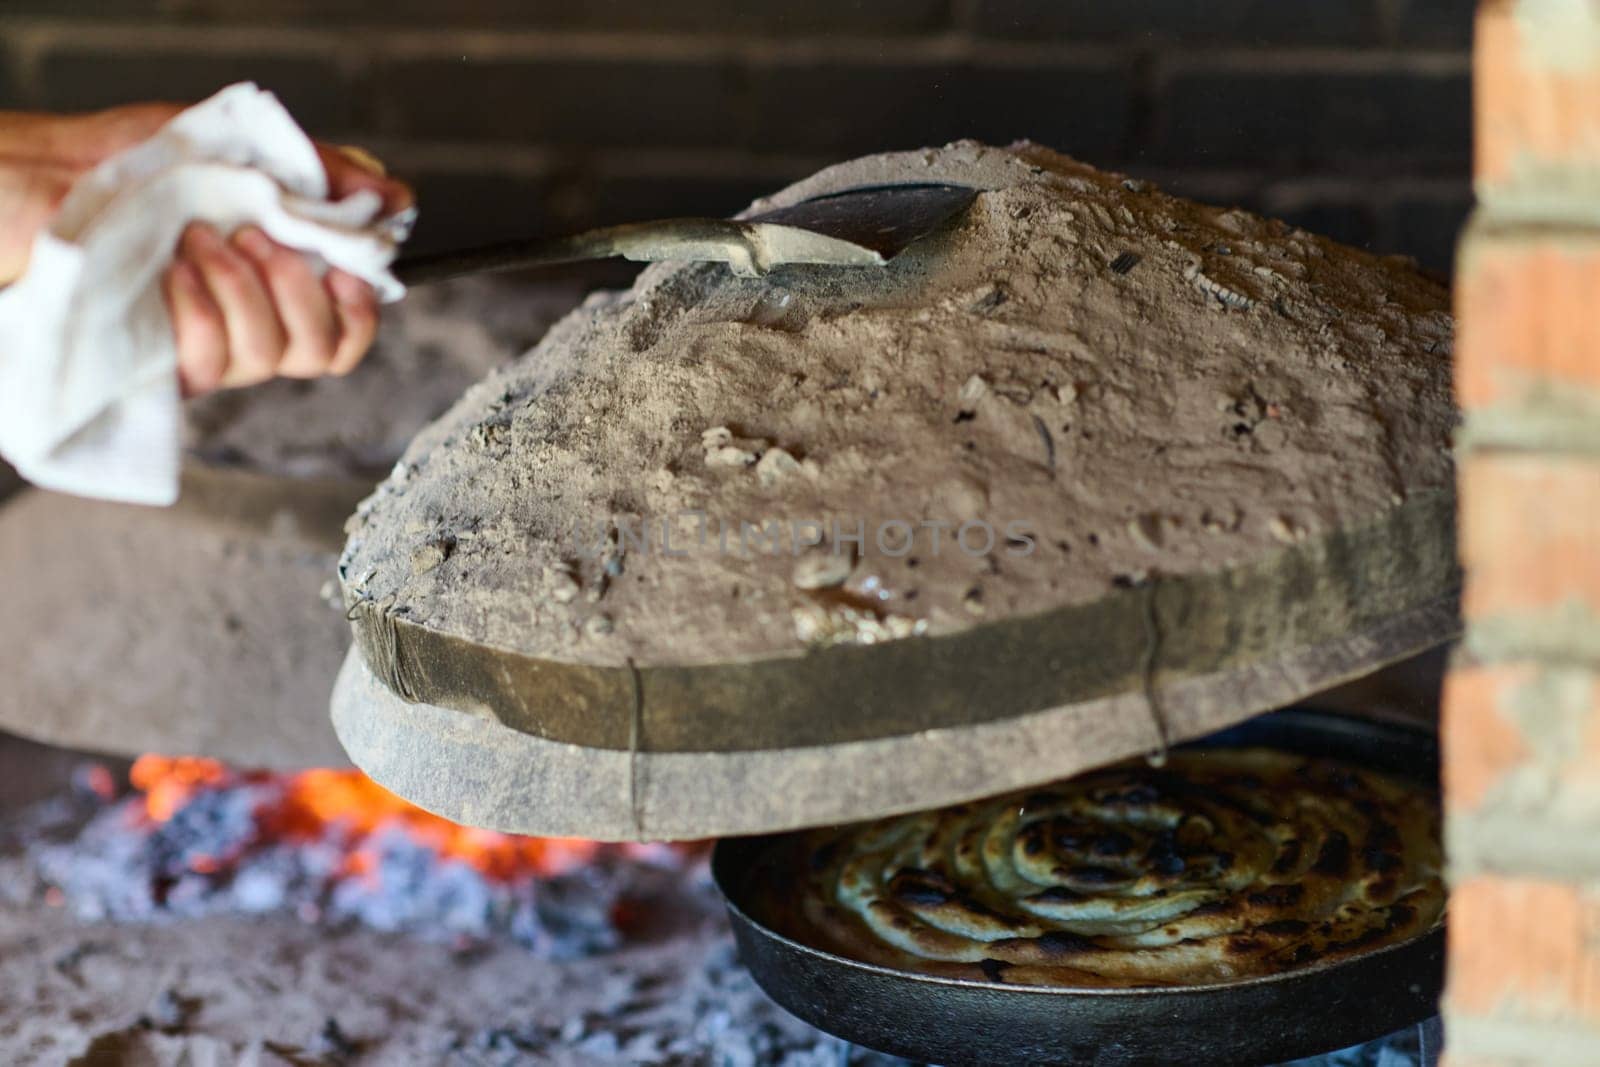 Capturing the essence of Bosnian culinary tradition, step-by-step preparation of a traditional Bosnian pie, showcasing the meticulous craftsmanship and authentic flavors involved in the culinary journey by dotshock